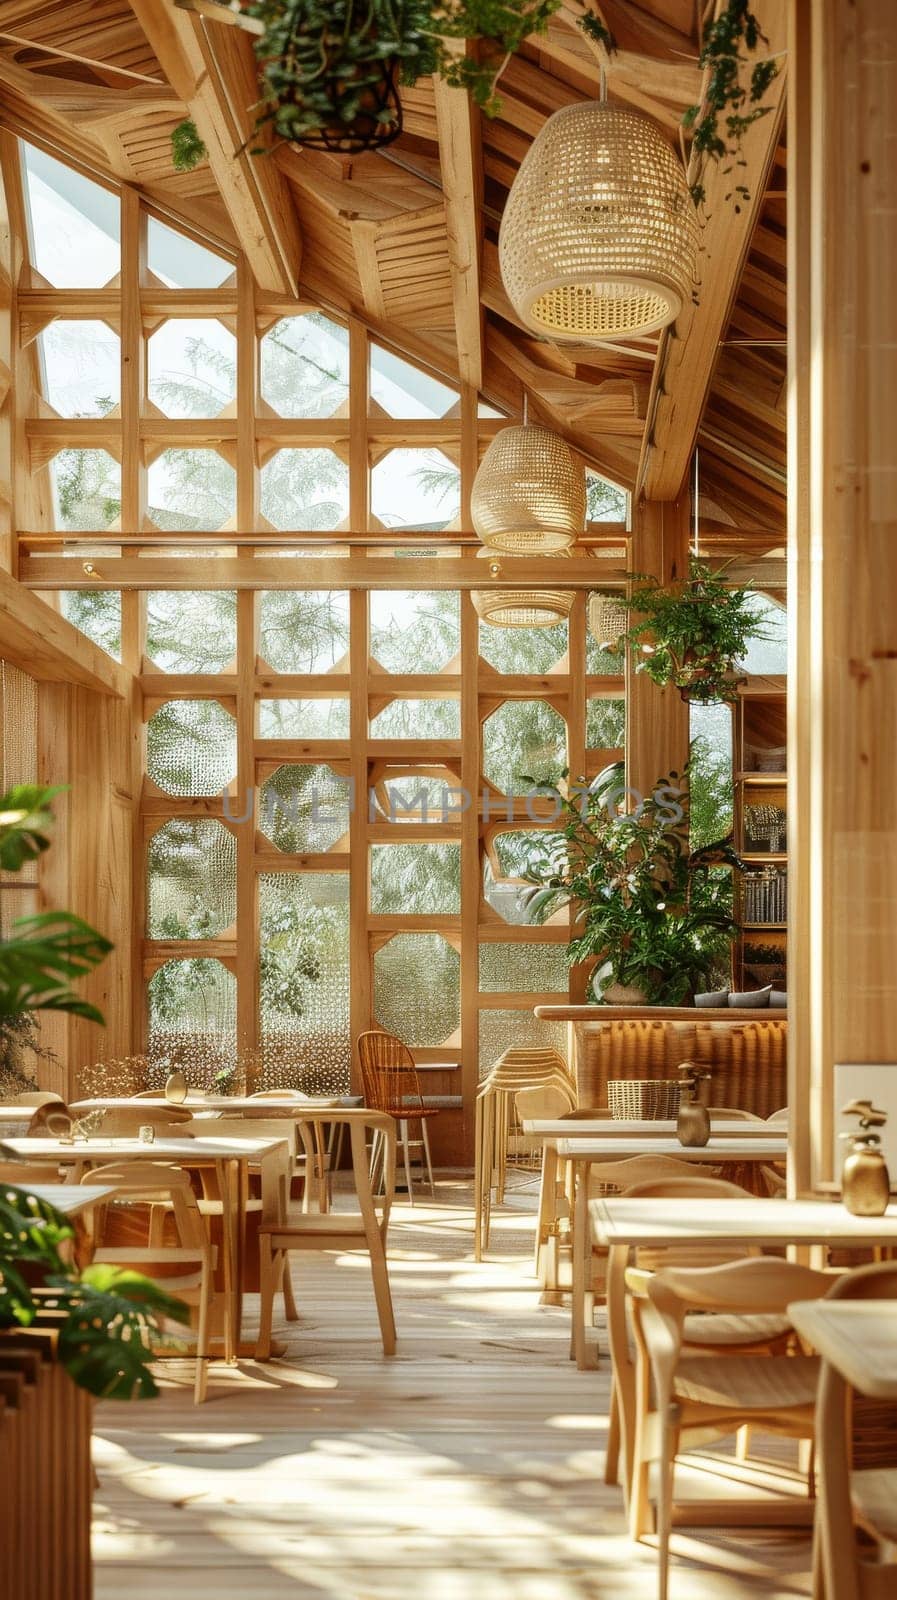 A restaurant with wooden floors and a lot of plants. The atmosphere is warm and inviting. The tables are arranged in a way that encourages conversation and socializing